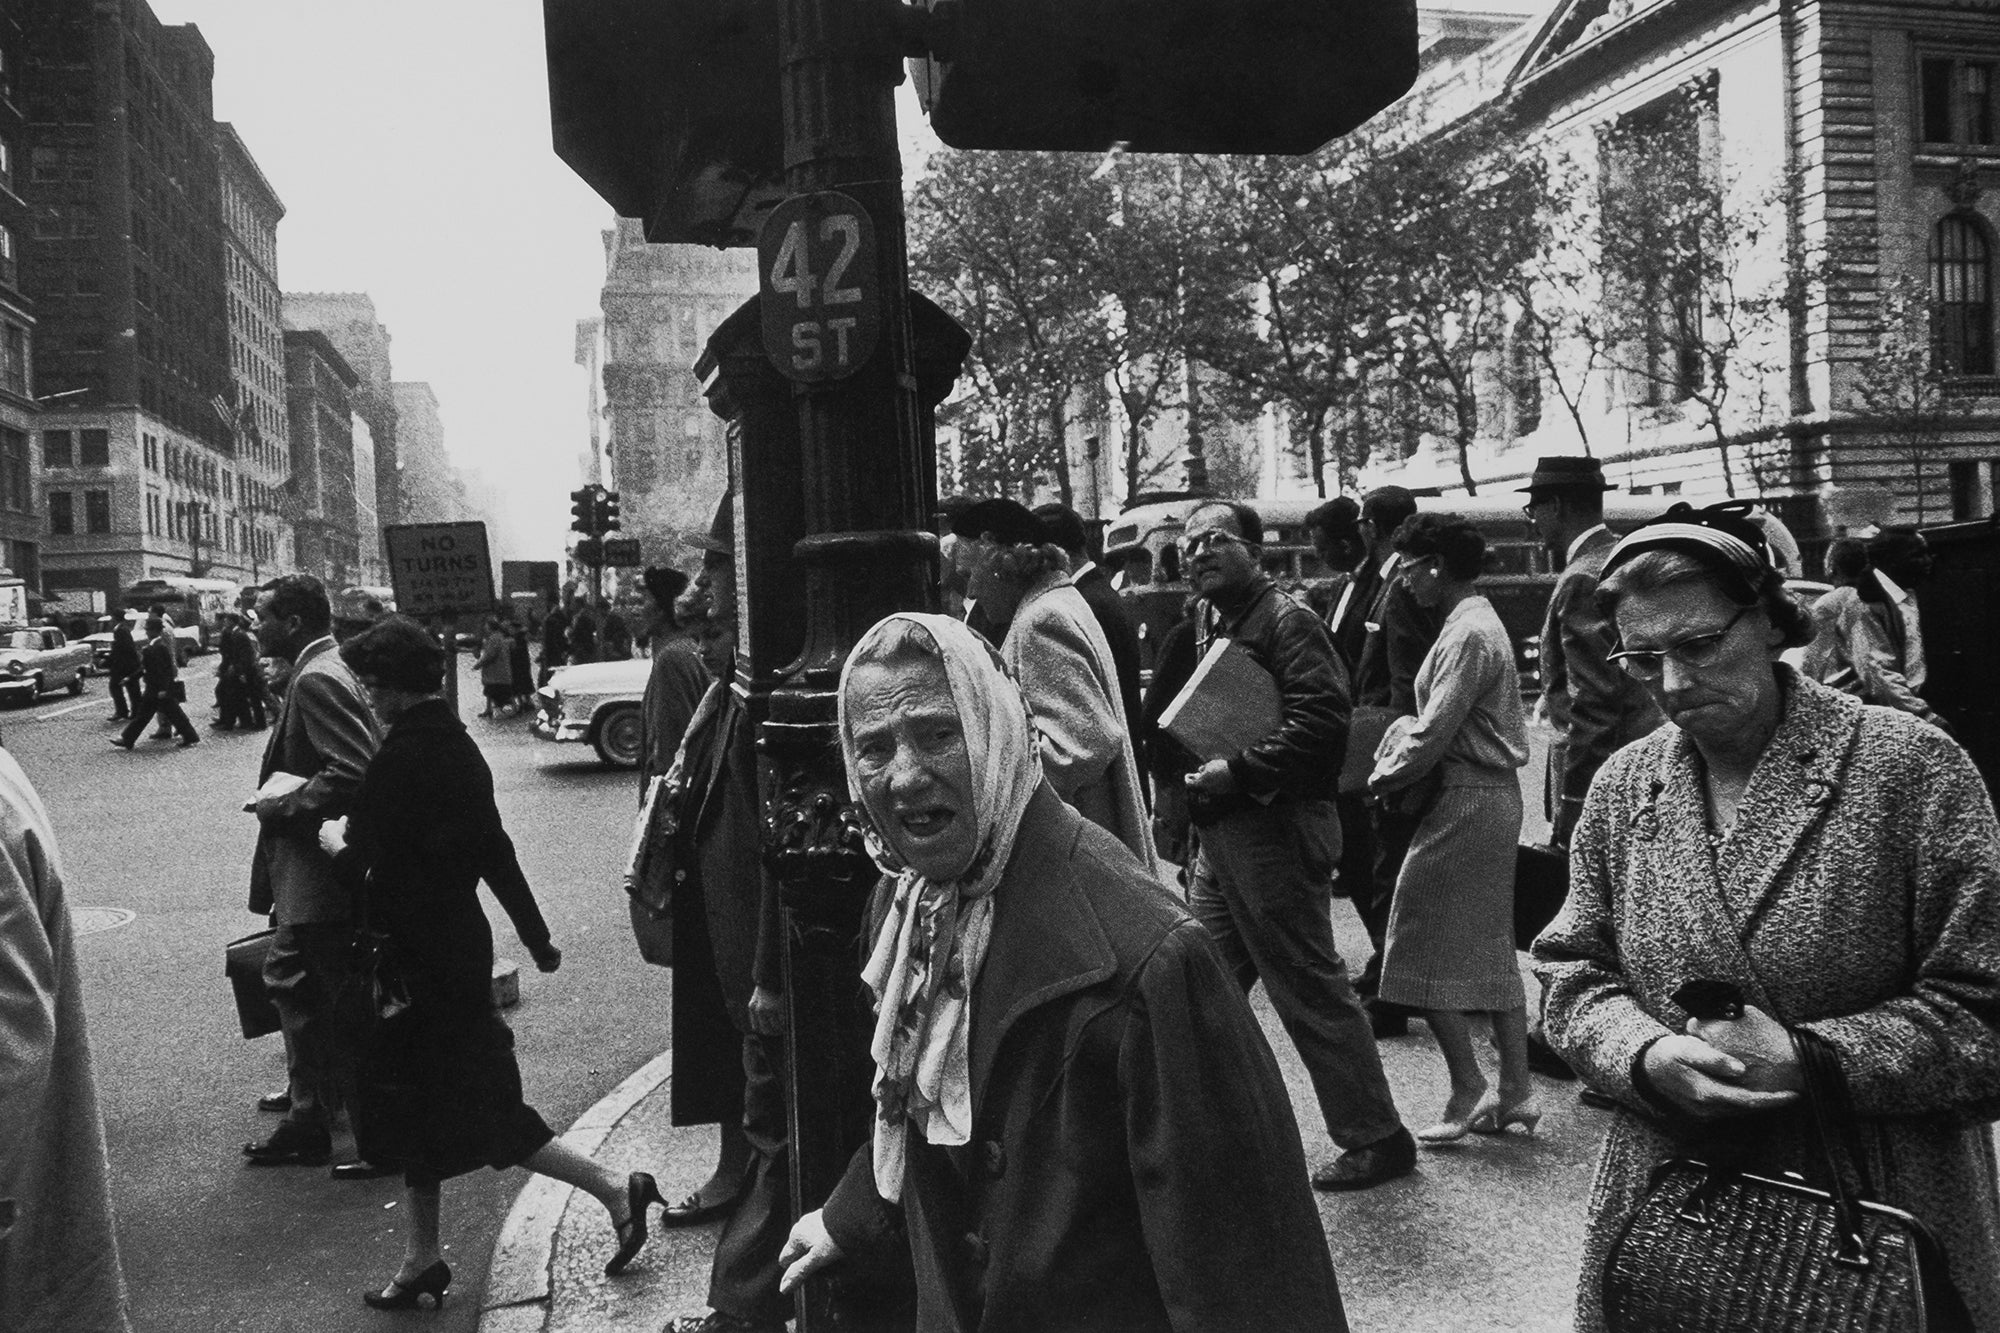 Garry Winogrand — The Man in the Crowd